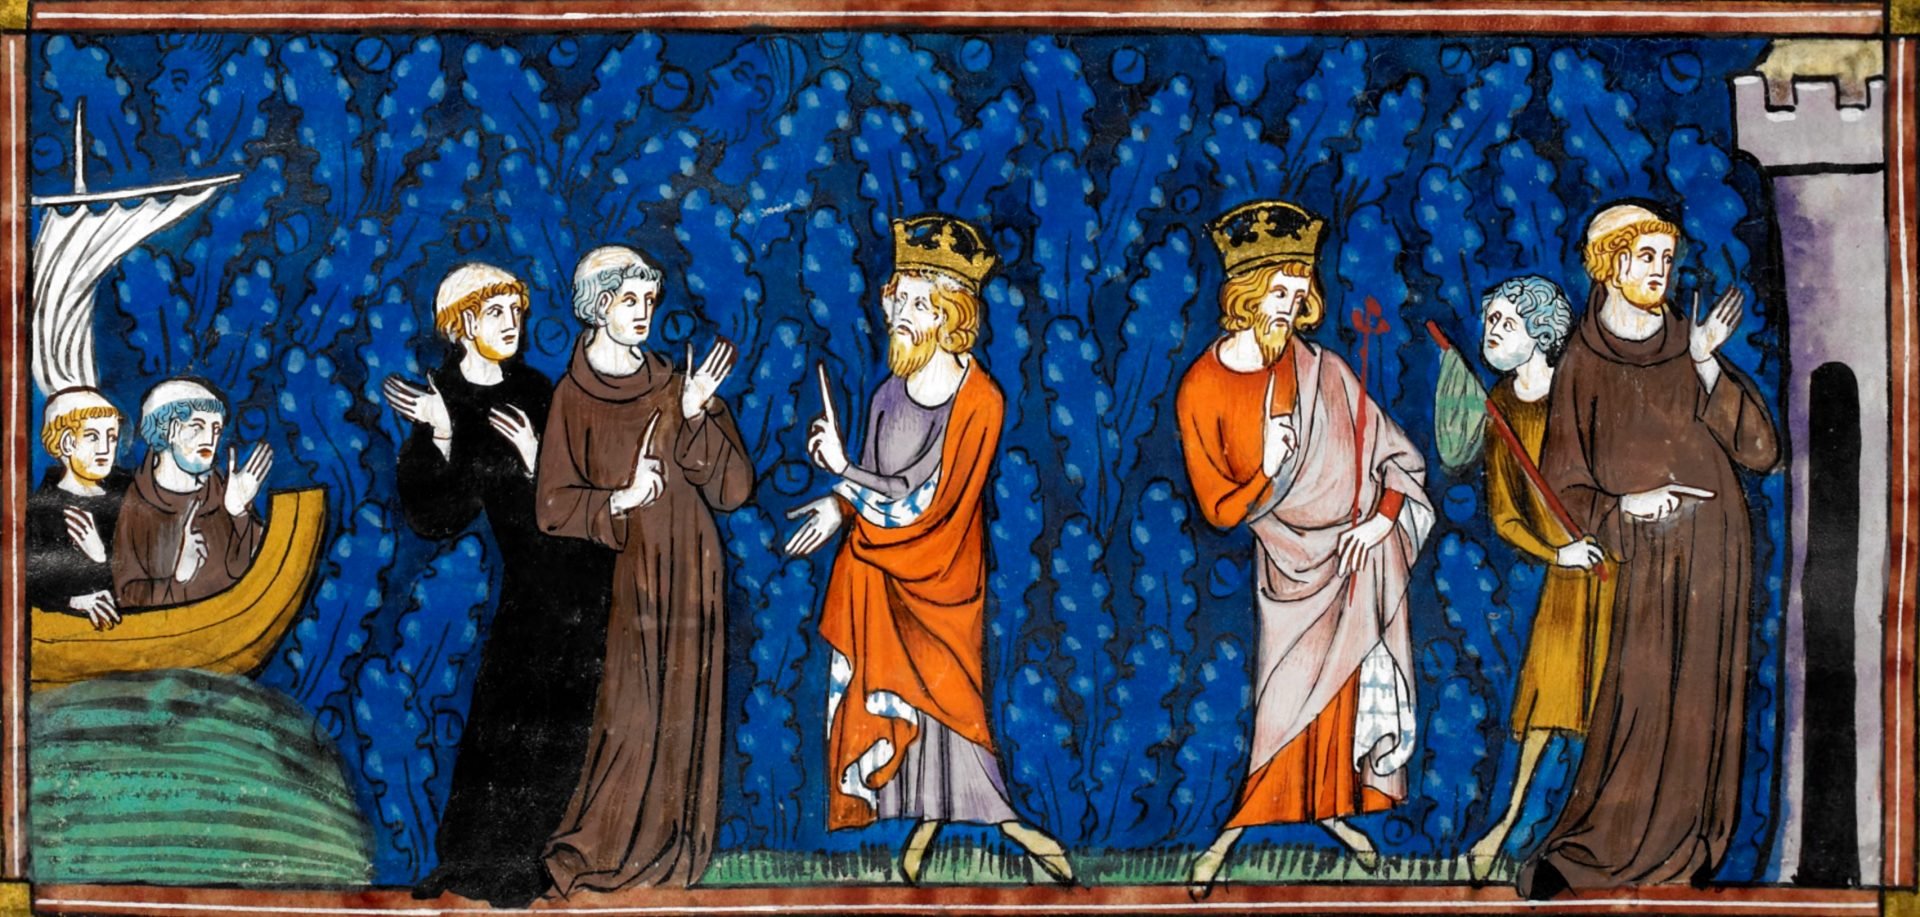 A medieval manuscript illustration of a group of people: Charlemagne, Alcuin and his assistant. The people are standing on a blue background with a pattern of blue flowers. The people are wearing medieval clothing, including crowns and robes. The people are standing in front of a castle-like structure with a flag on top.